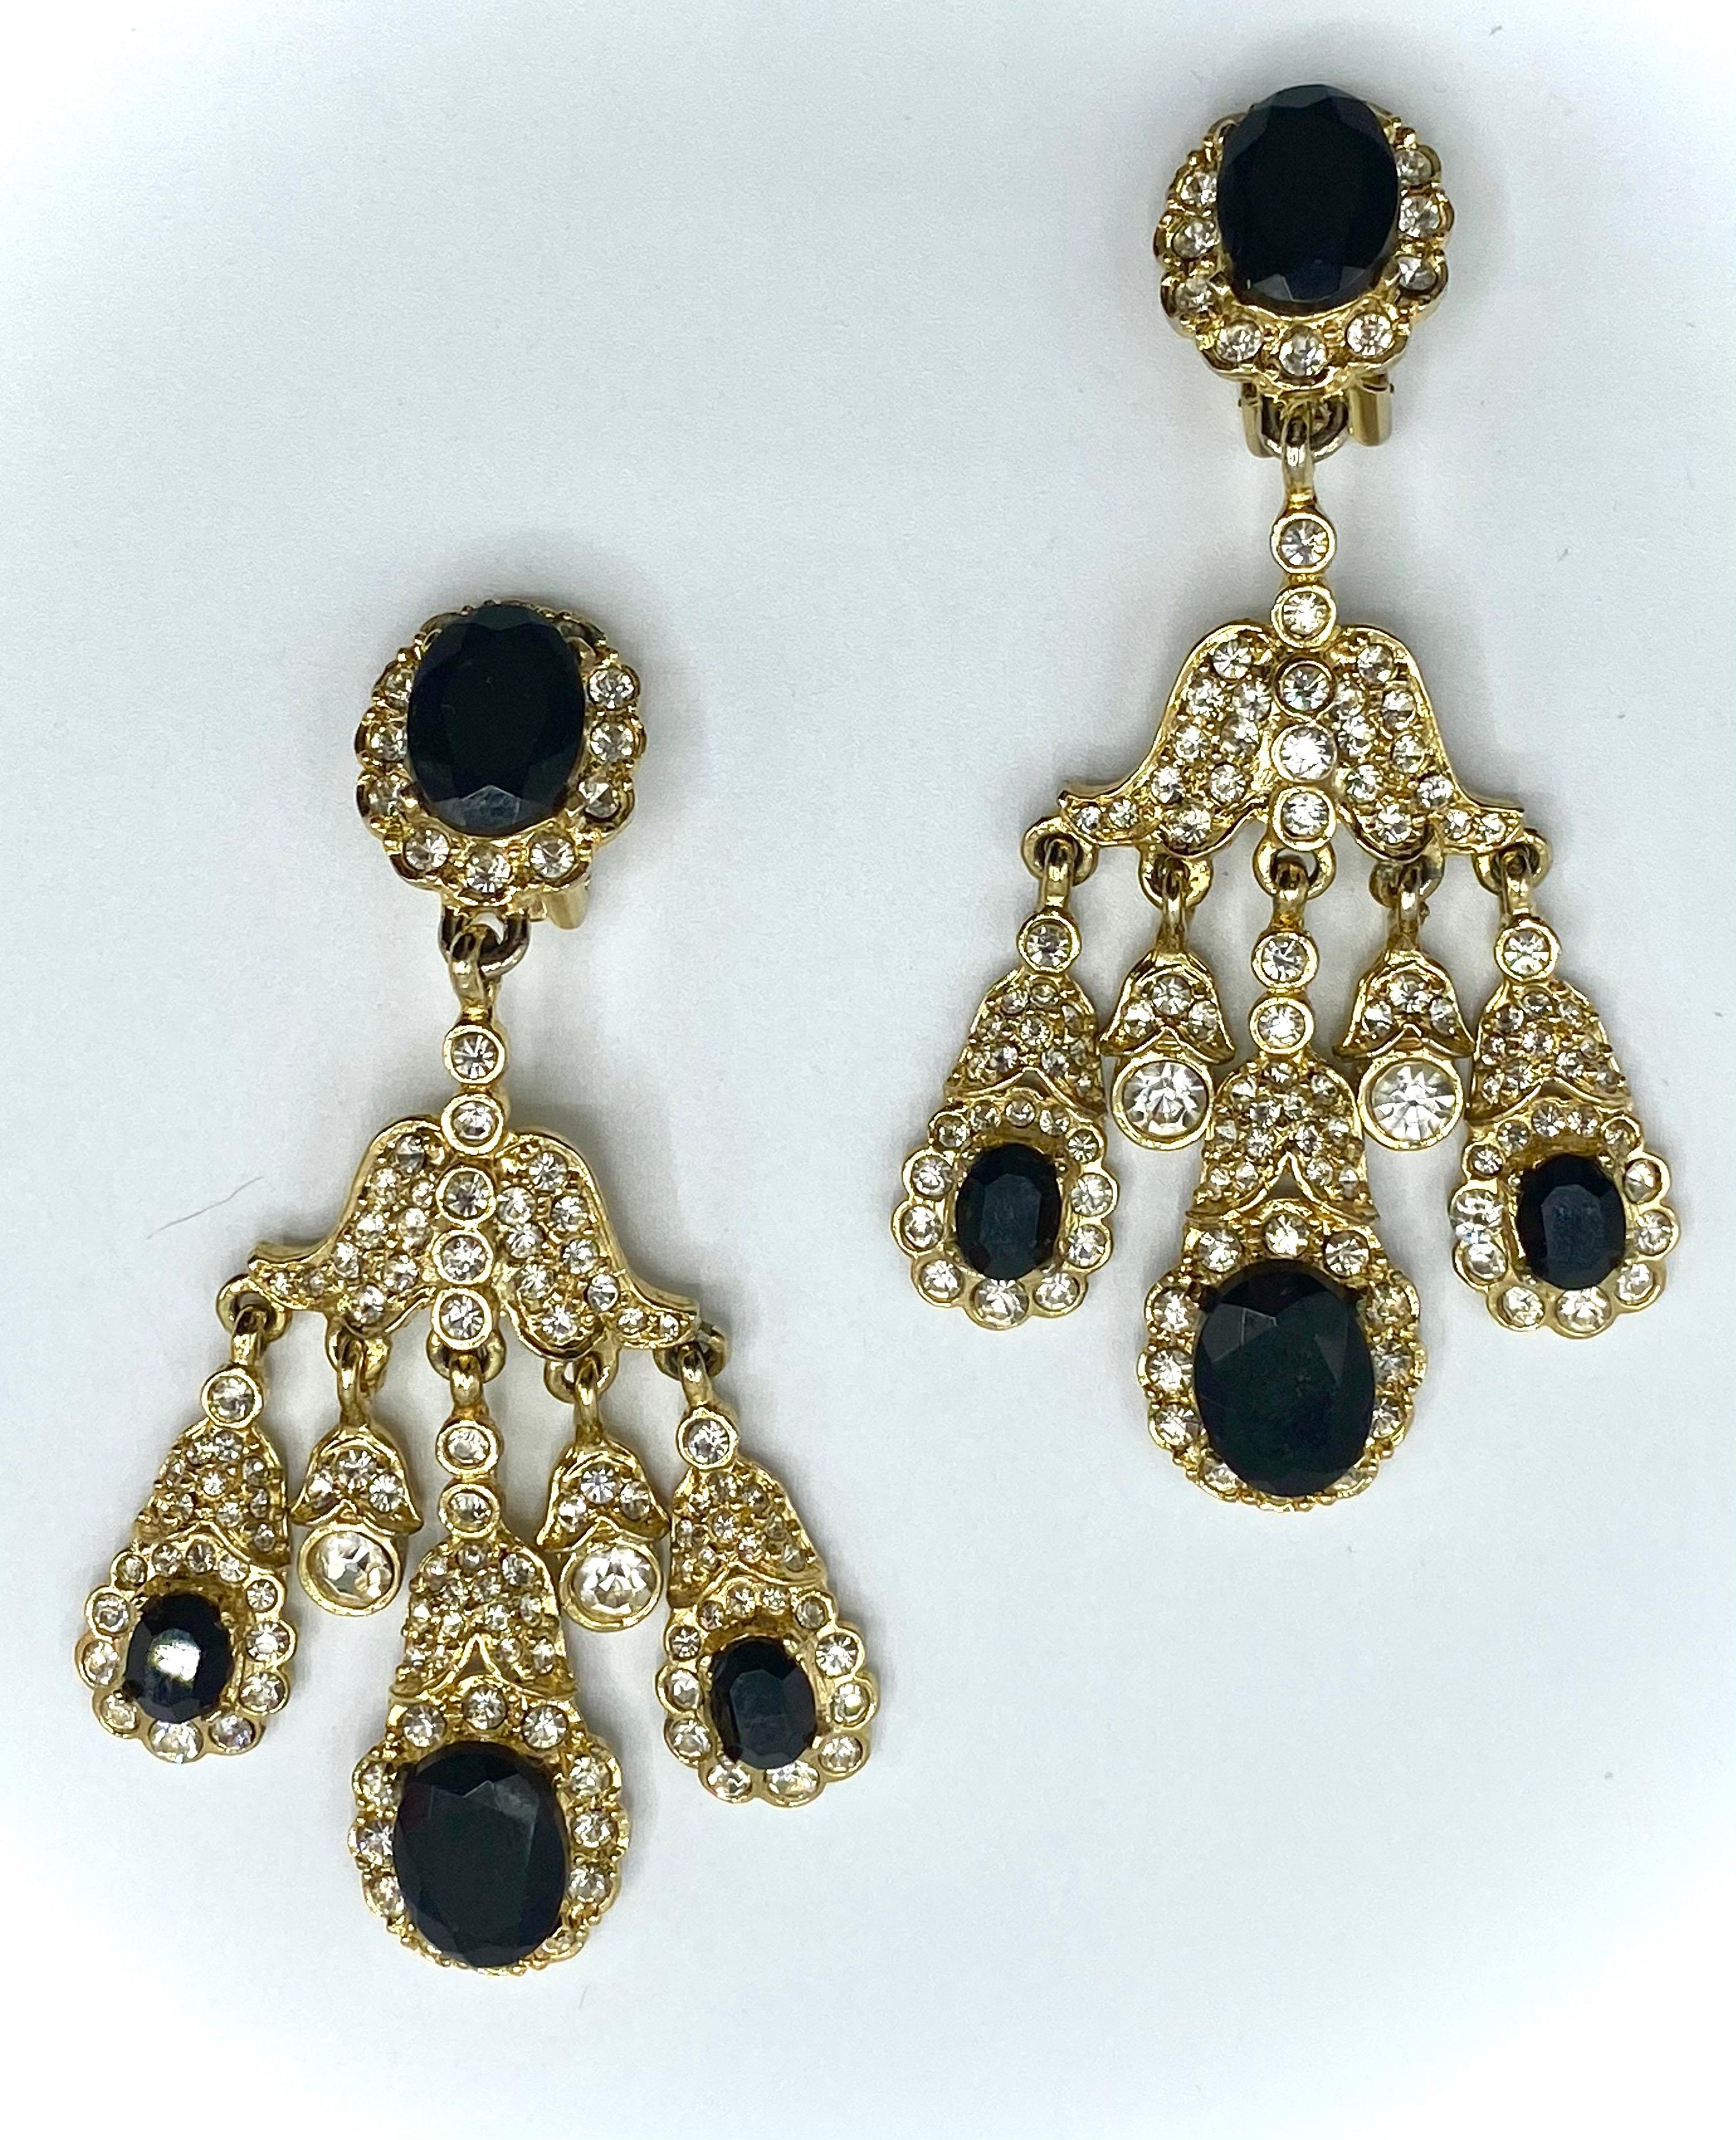 An elegant pair of 1980s Kenneth Jay Lane Girandole chandelier earrings in gold, rhinestone and black crystal. Girandole earrings have a central piece from which three pendants hang and date back to the 17th century when they first appeared. Each